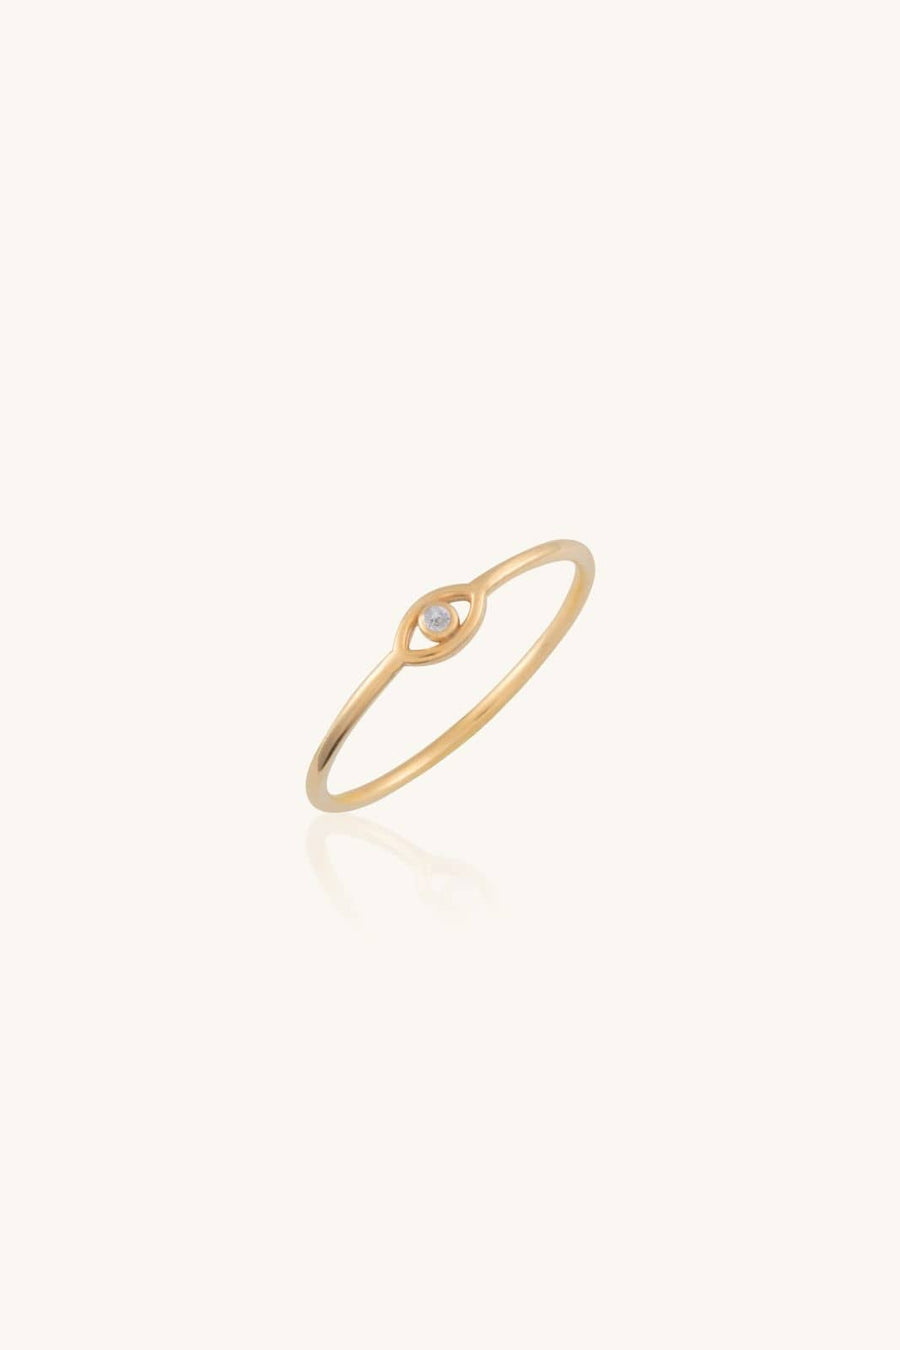 Pave, Eye Ring, Jewelry, Fashion, Accessories, Trendy, Unique.